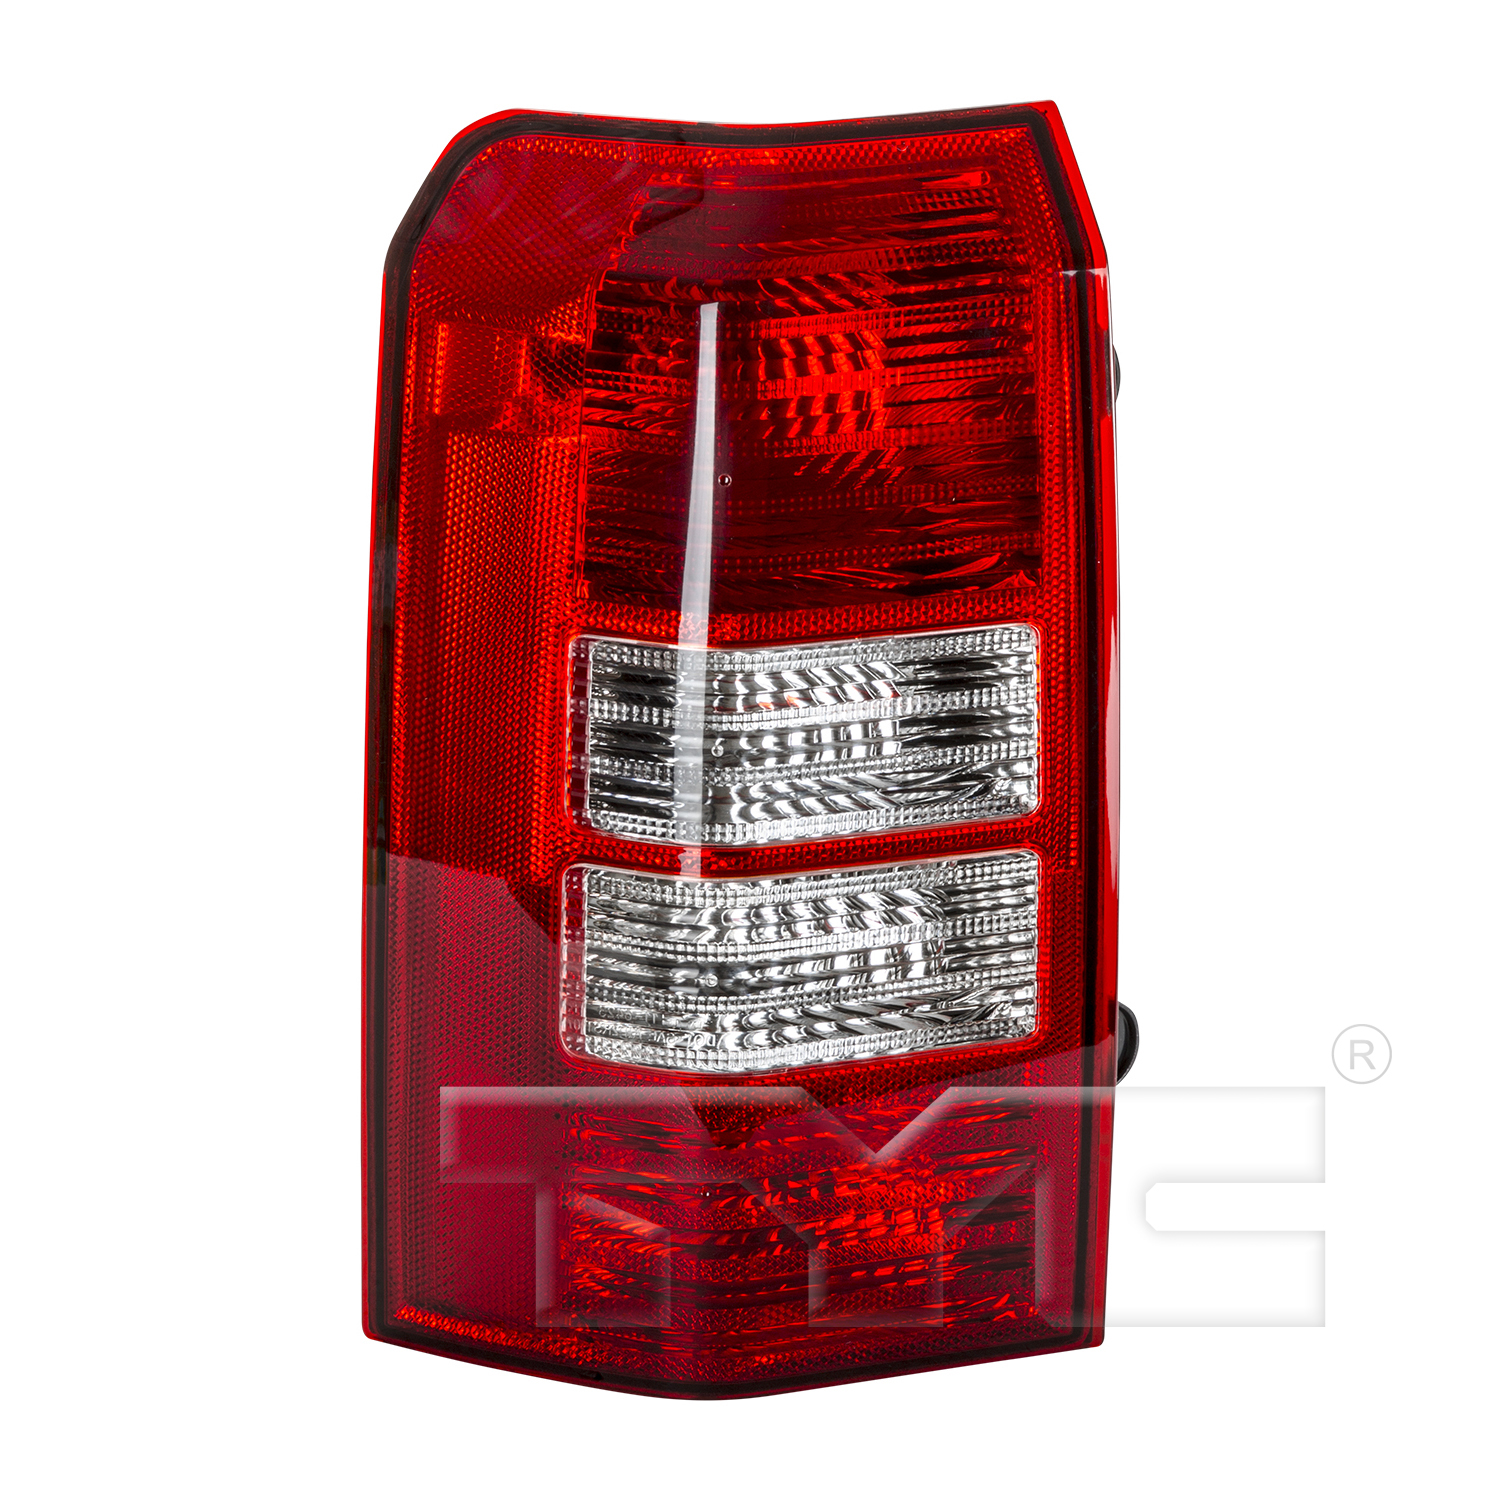 Aftermarket TAILLIGHTS for JEEP - PATRIOT, PATRIOT,08-17,LT Taillamp assy